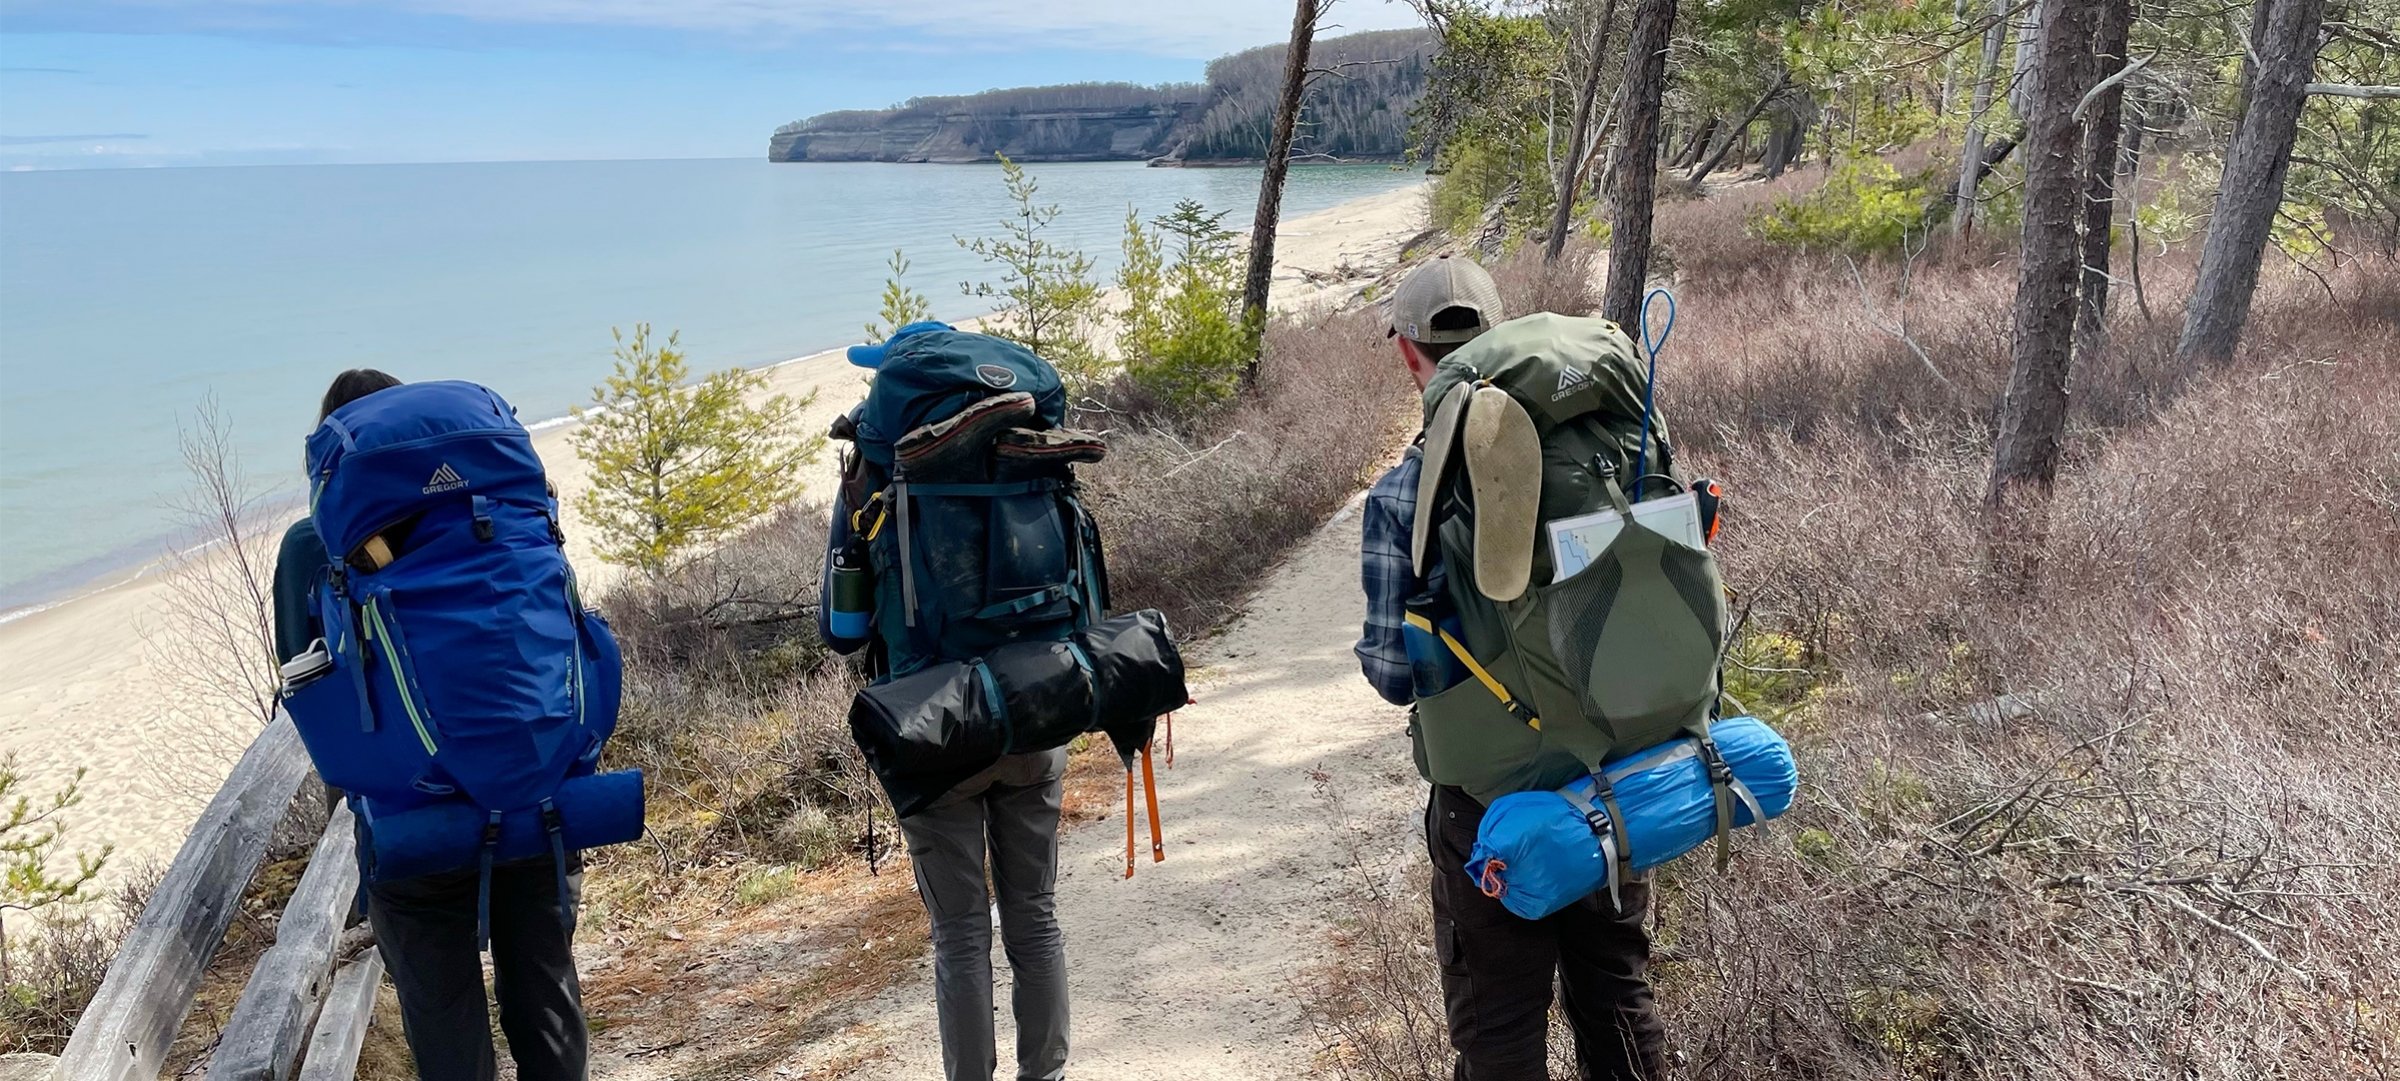 Three people with hiking backpacks look out over shoreline.